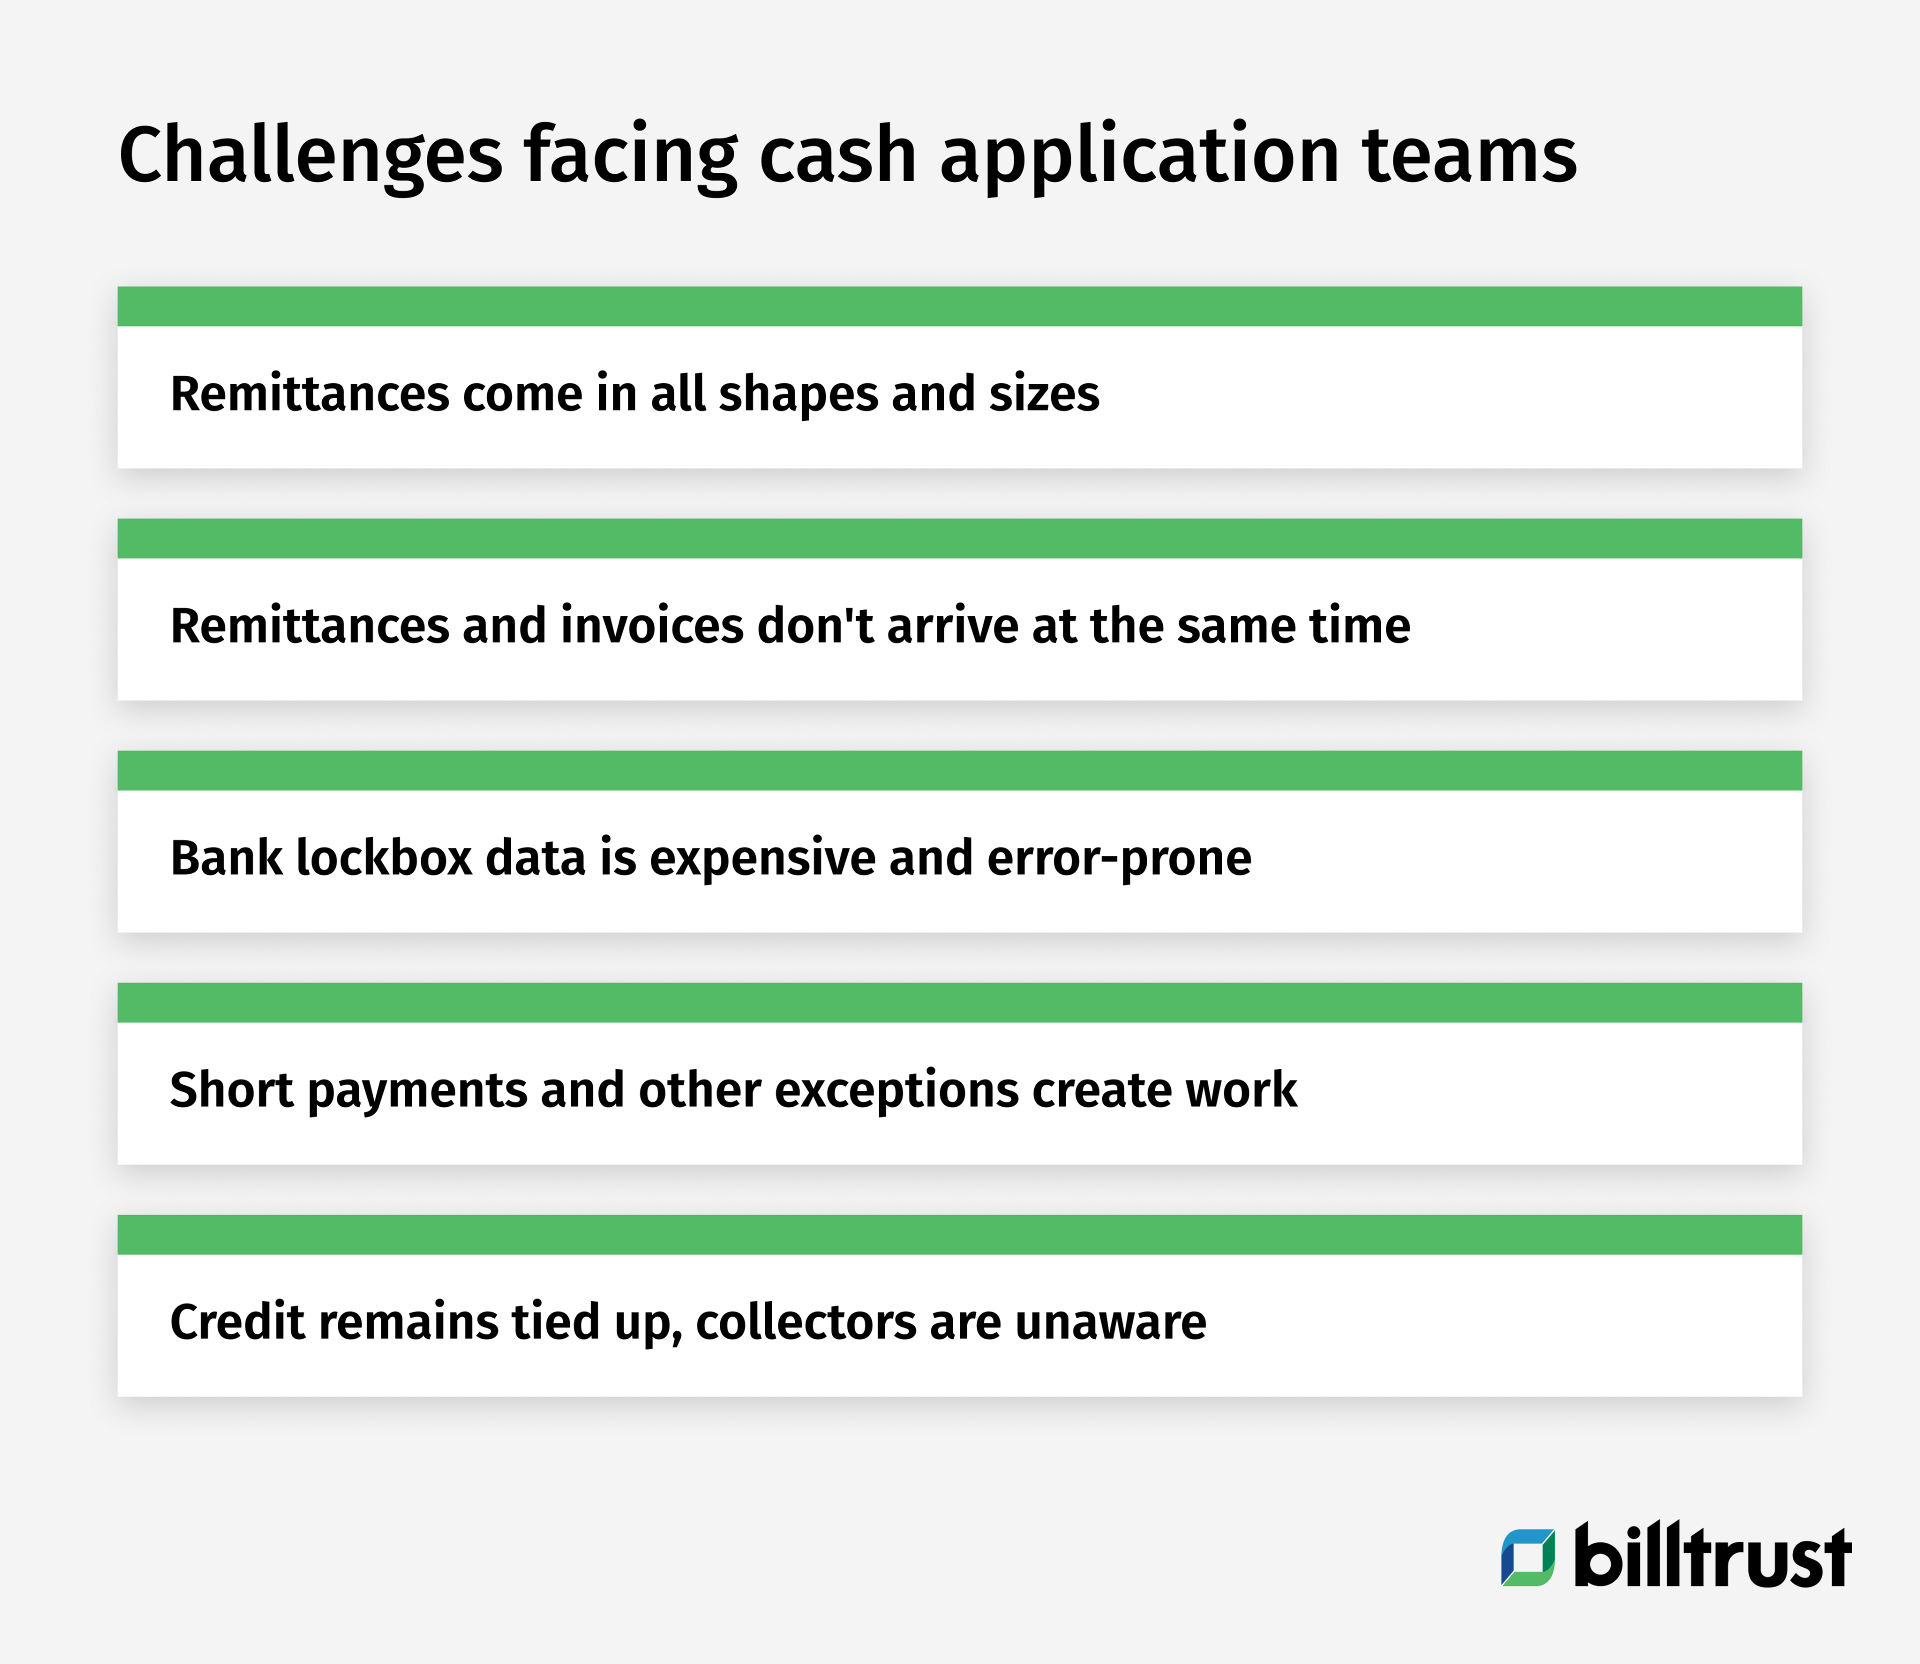 the challenges facing cash application teams